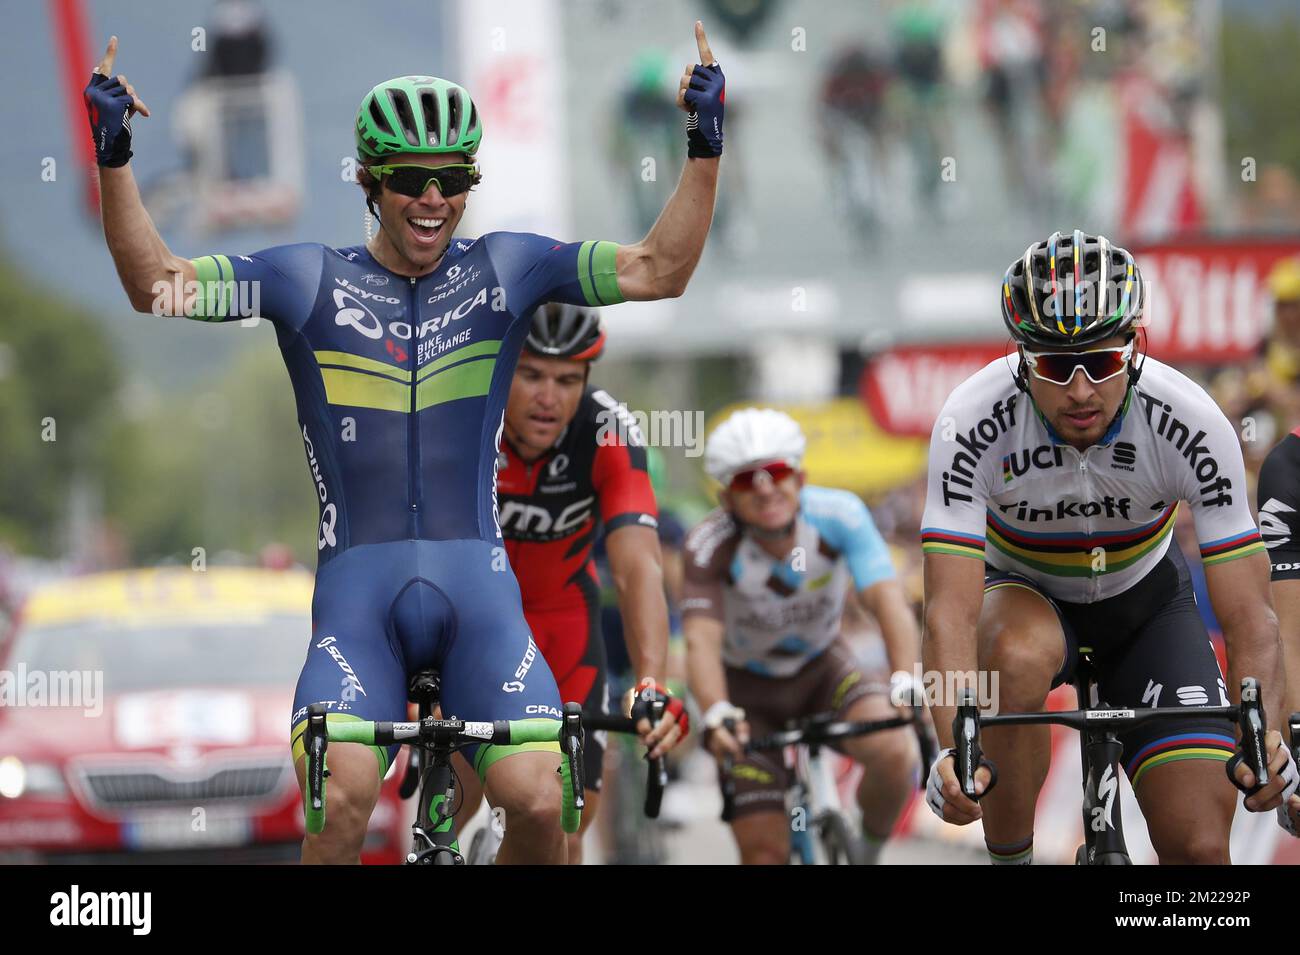 Australian Michael Matthews of Orica GreenEDGE celebrates as he crosses the finish line to win the tenth stage of the 103rd edition of the Tour de France cycling race, 197km from Escaldes-Engordany, Andorra to Revel, France on Tuesday 12 July 2016.  Stock Photo